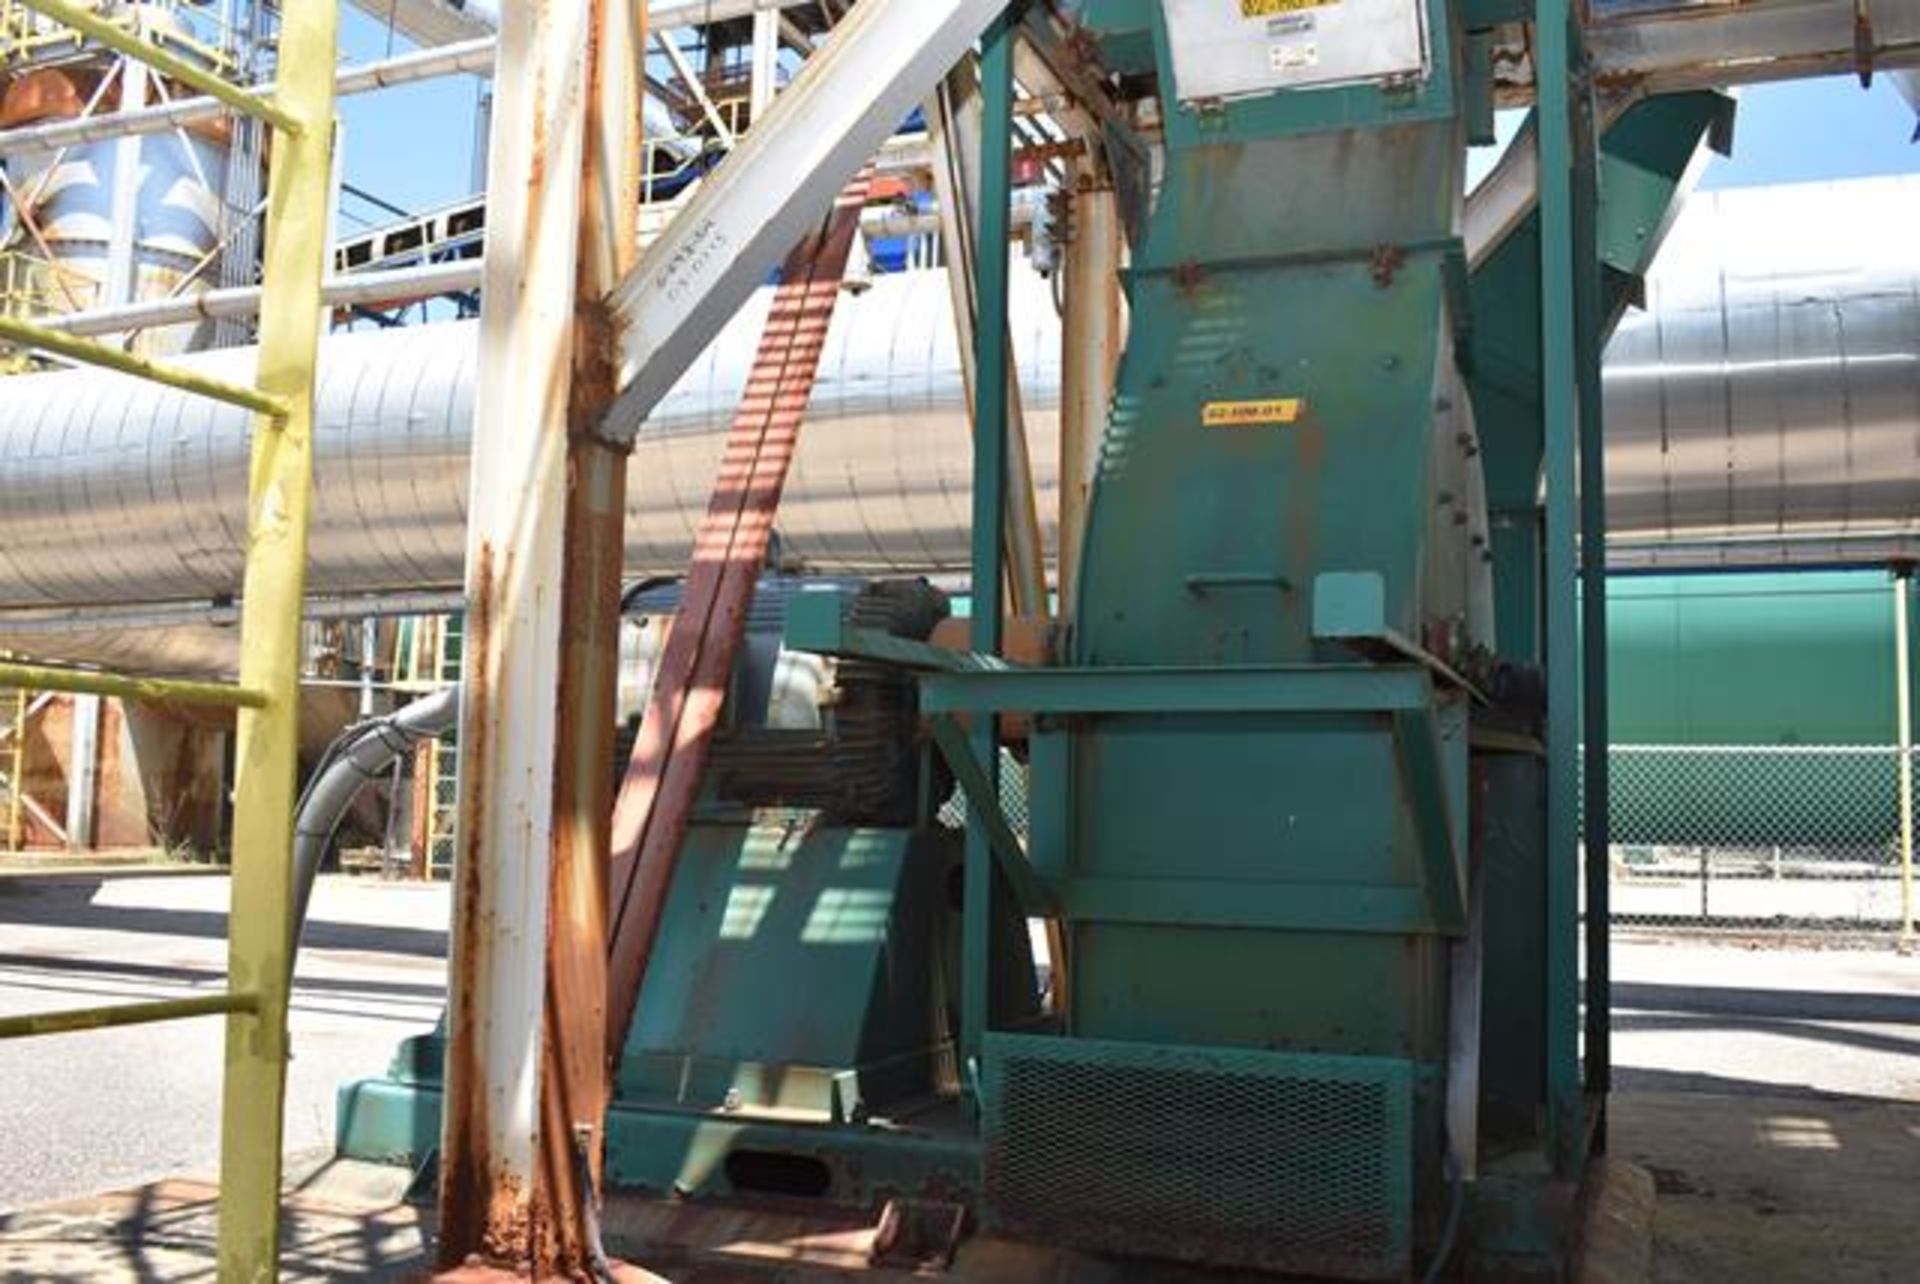 Hammer Mill 200 HP Motor - Green, Includes Bunting Magnet, SN N/A, ID 02-MG-01 - Image 2 of 2